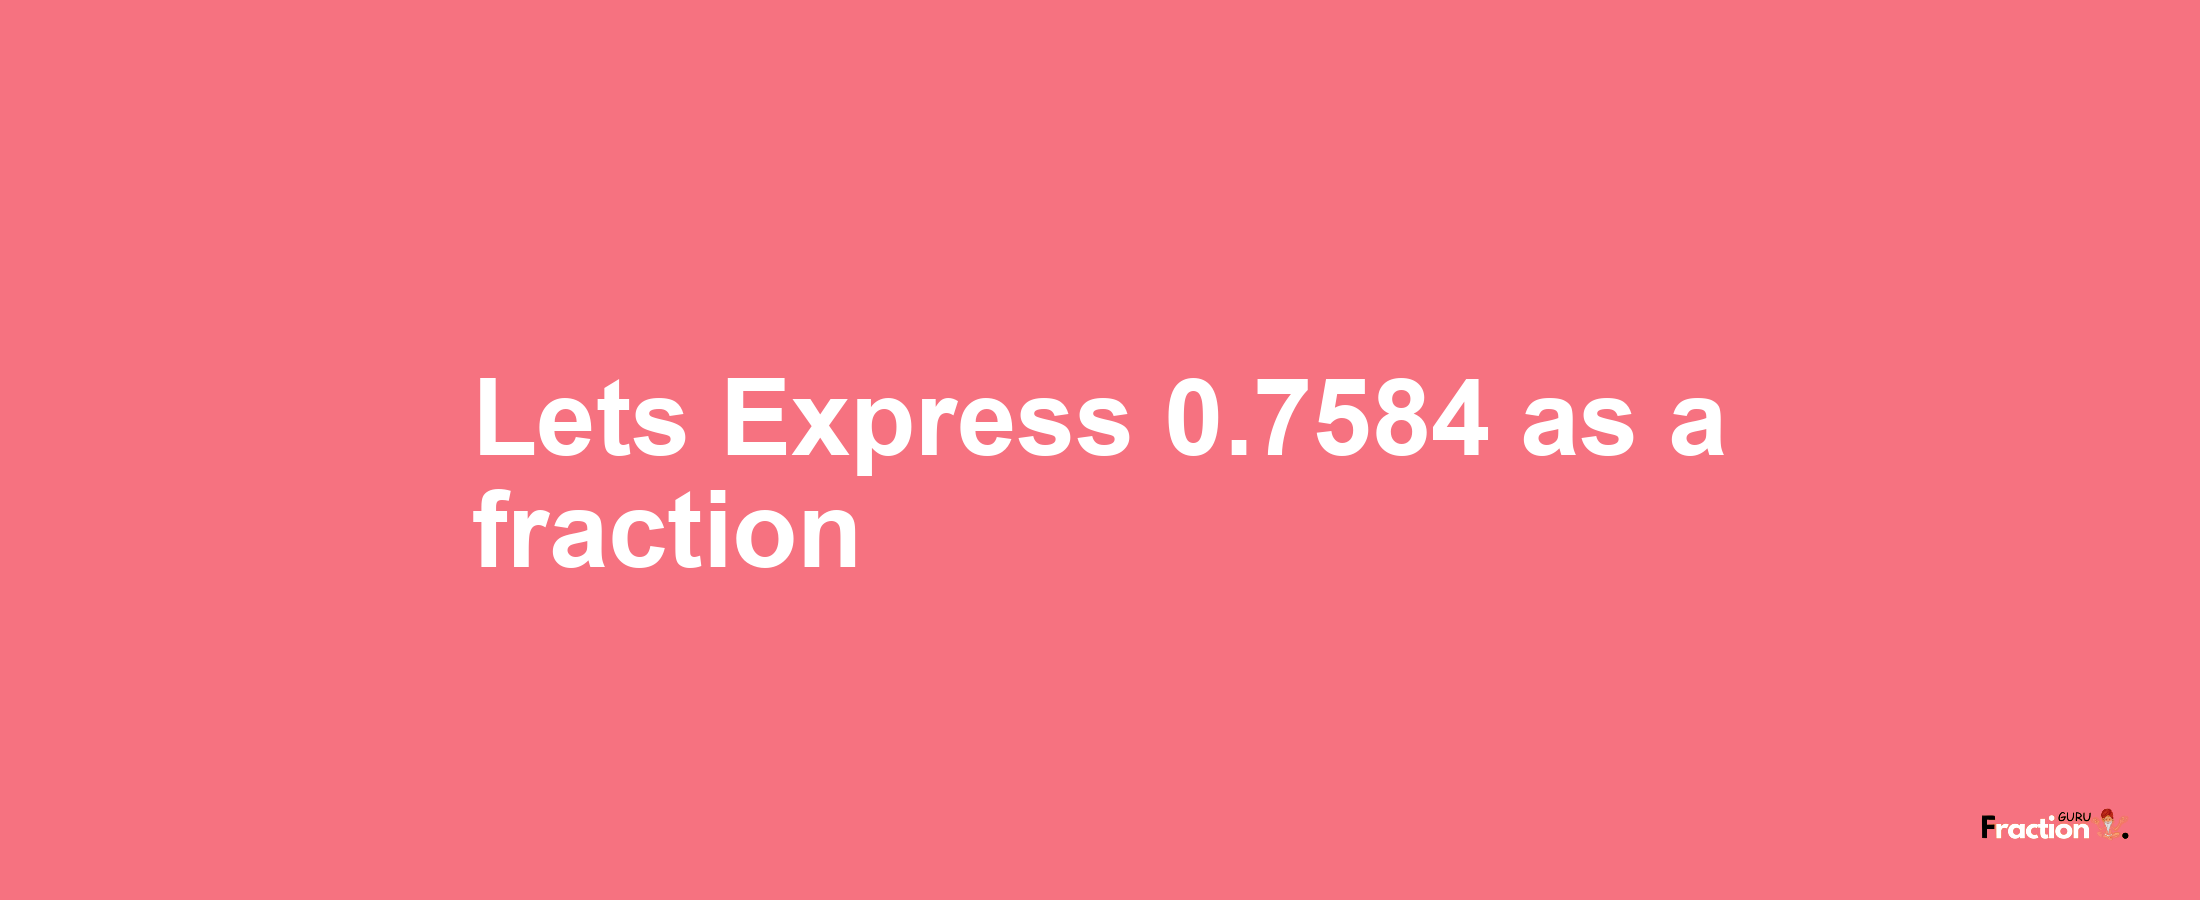 Lets Express 0.7584 as afraction